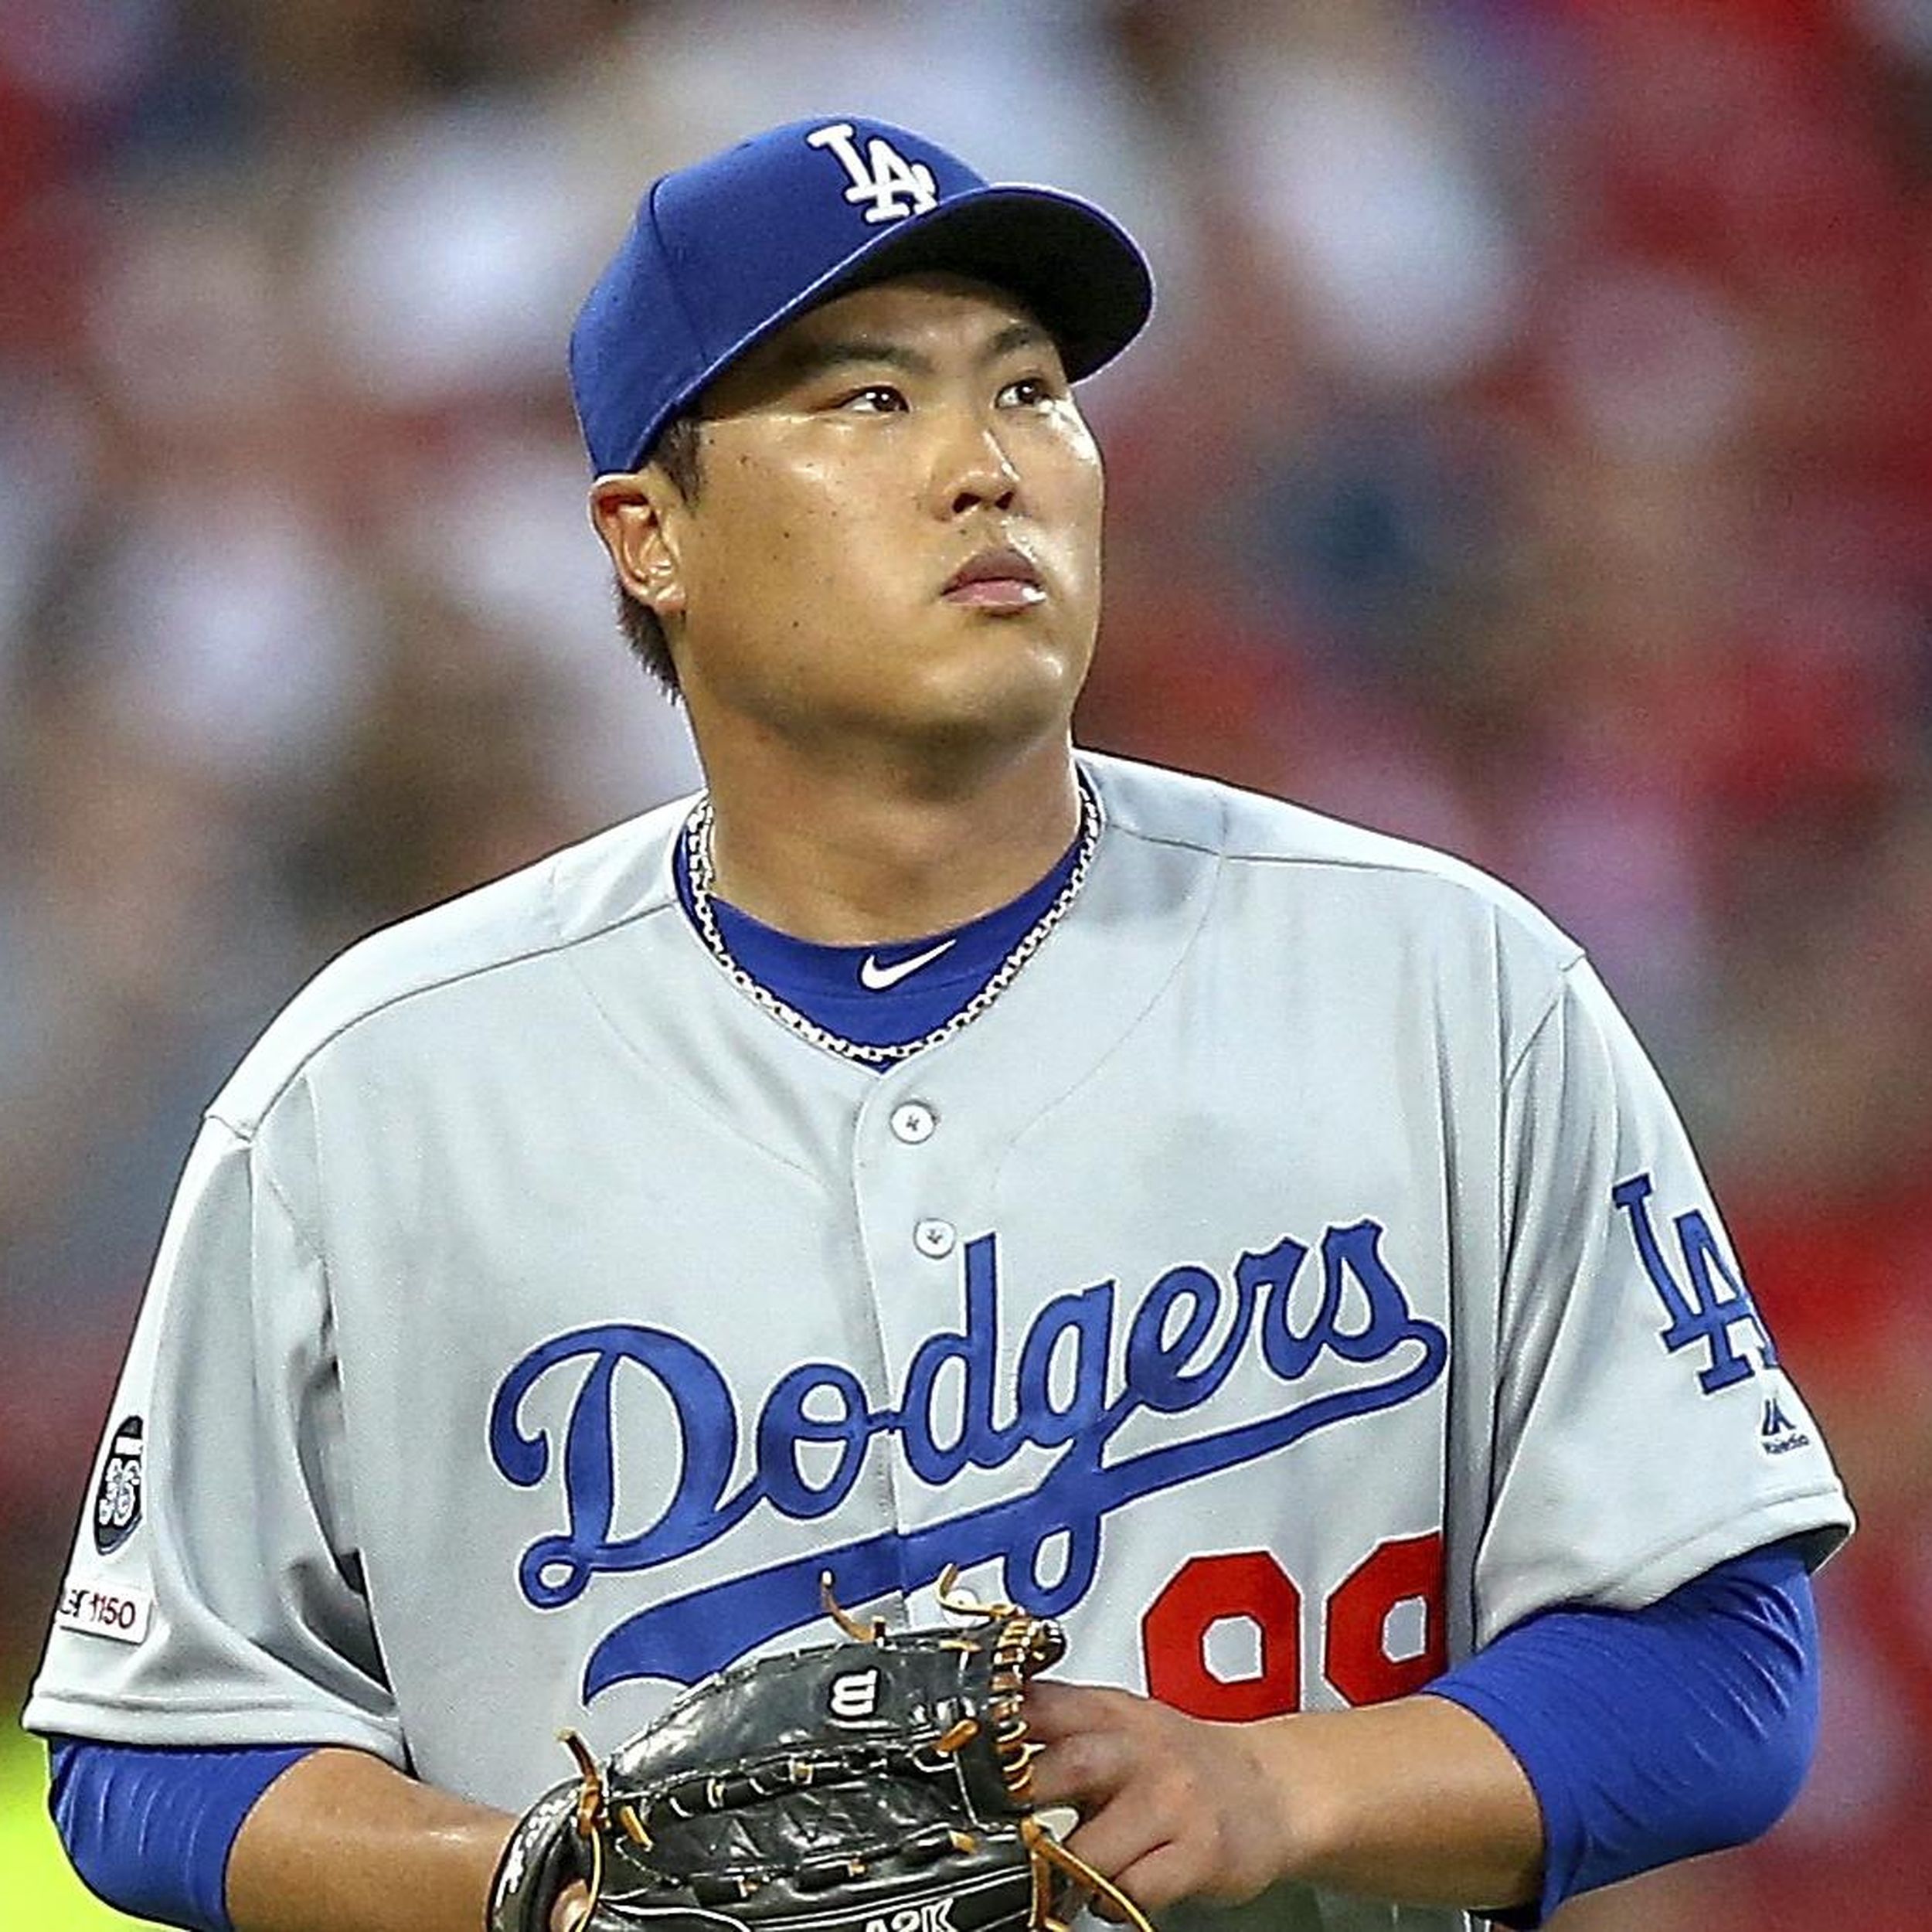 Dodgers place Hyun-Jin Ryu on DL with hip bruise